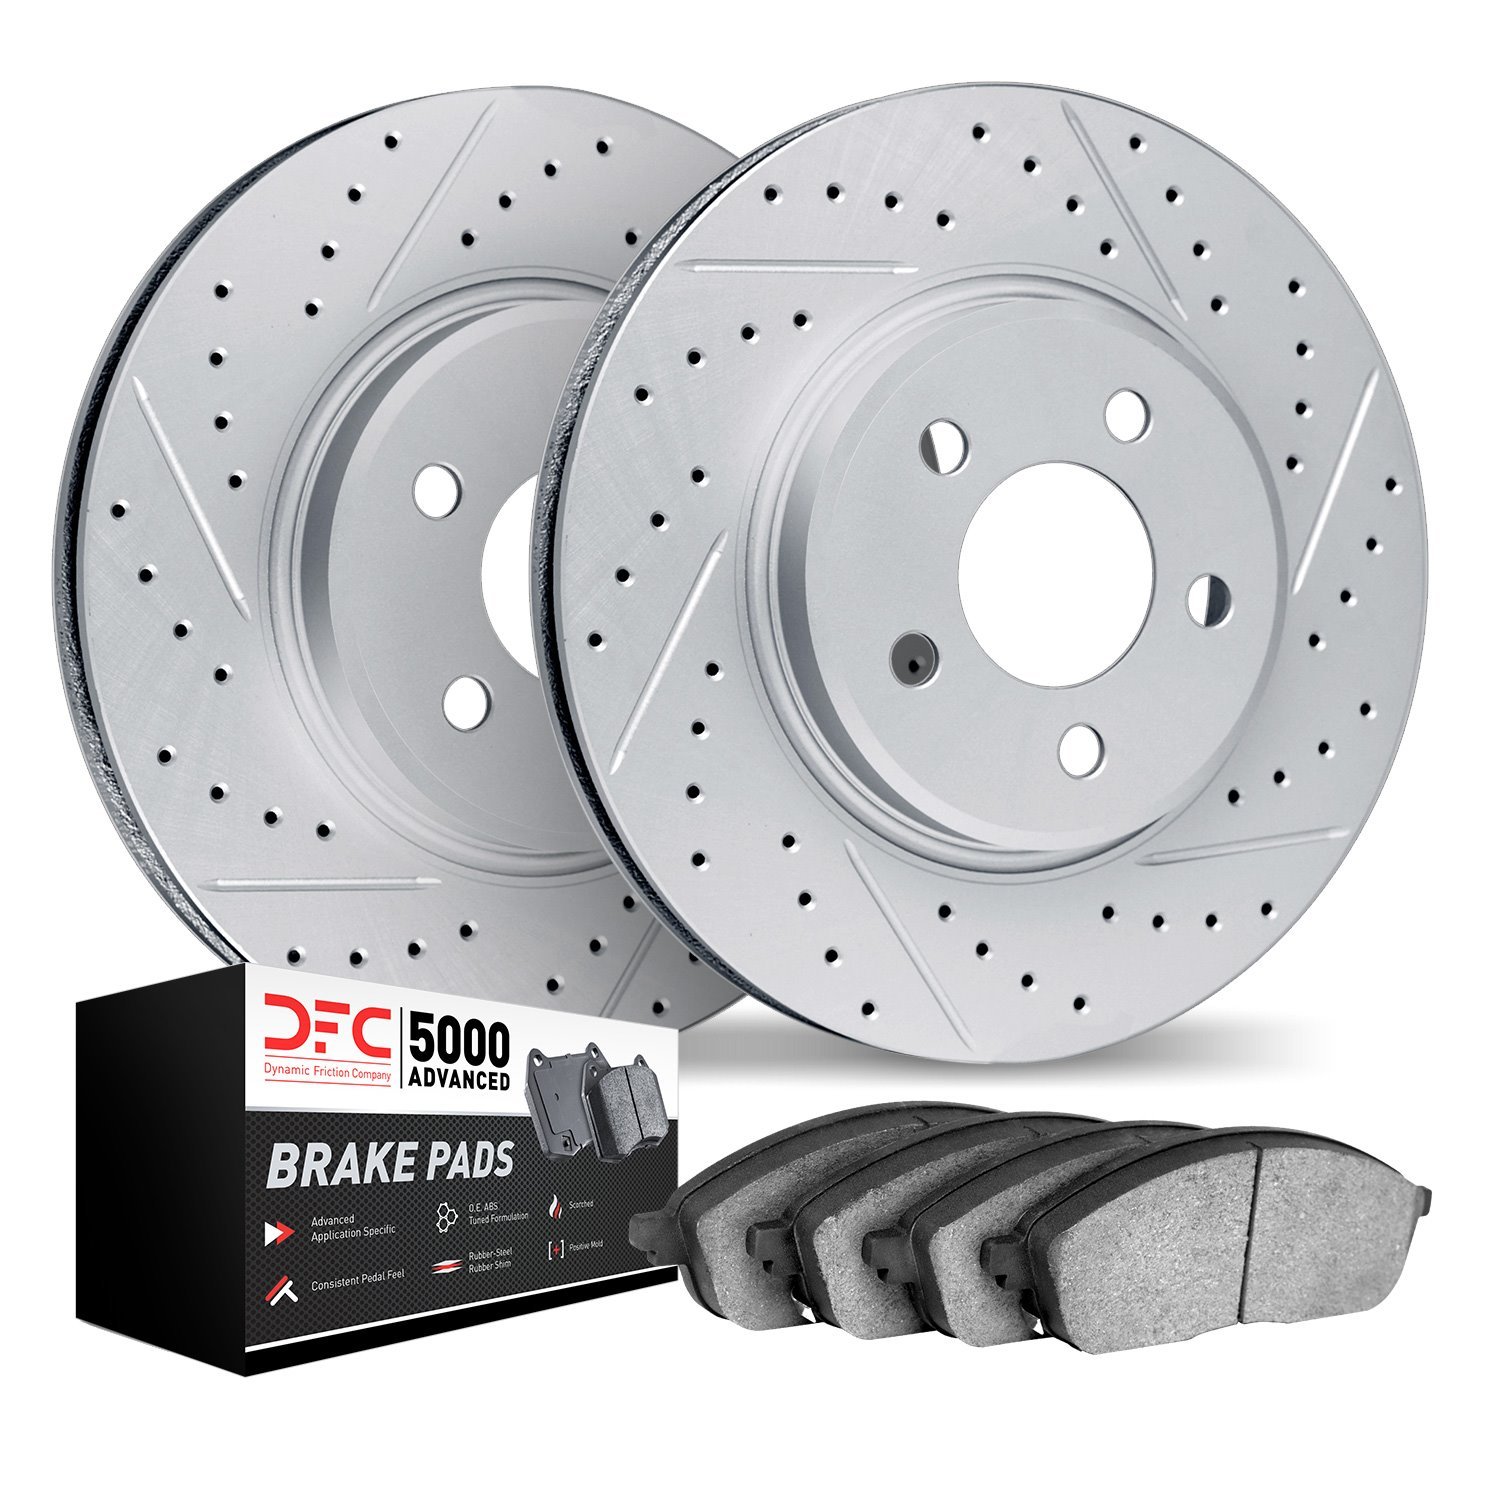 2502-02014 Geoperformance Drilled/Slotted Rotors w/5000 Advanced Brake Pads Kit, 1987-1989 Porsche, Position: Front